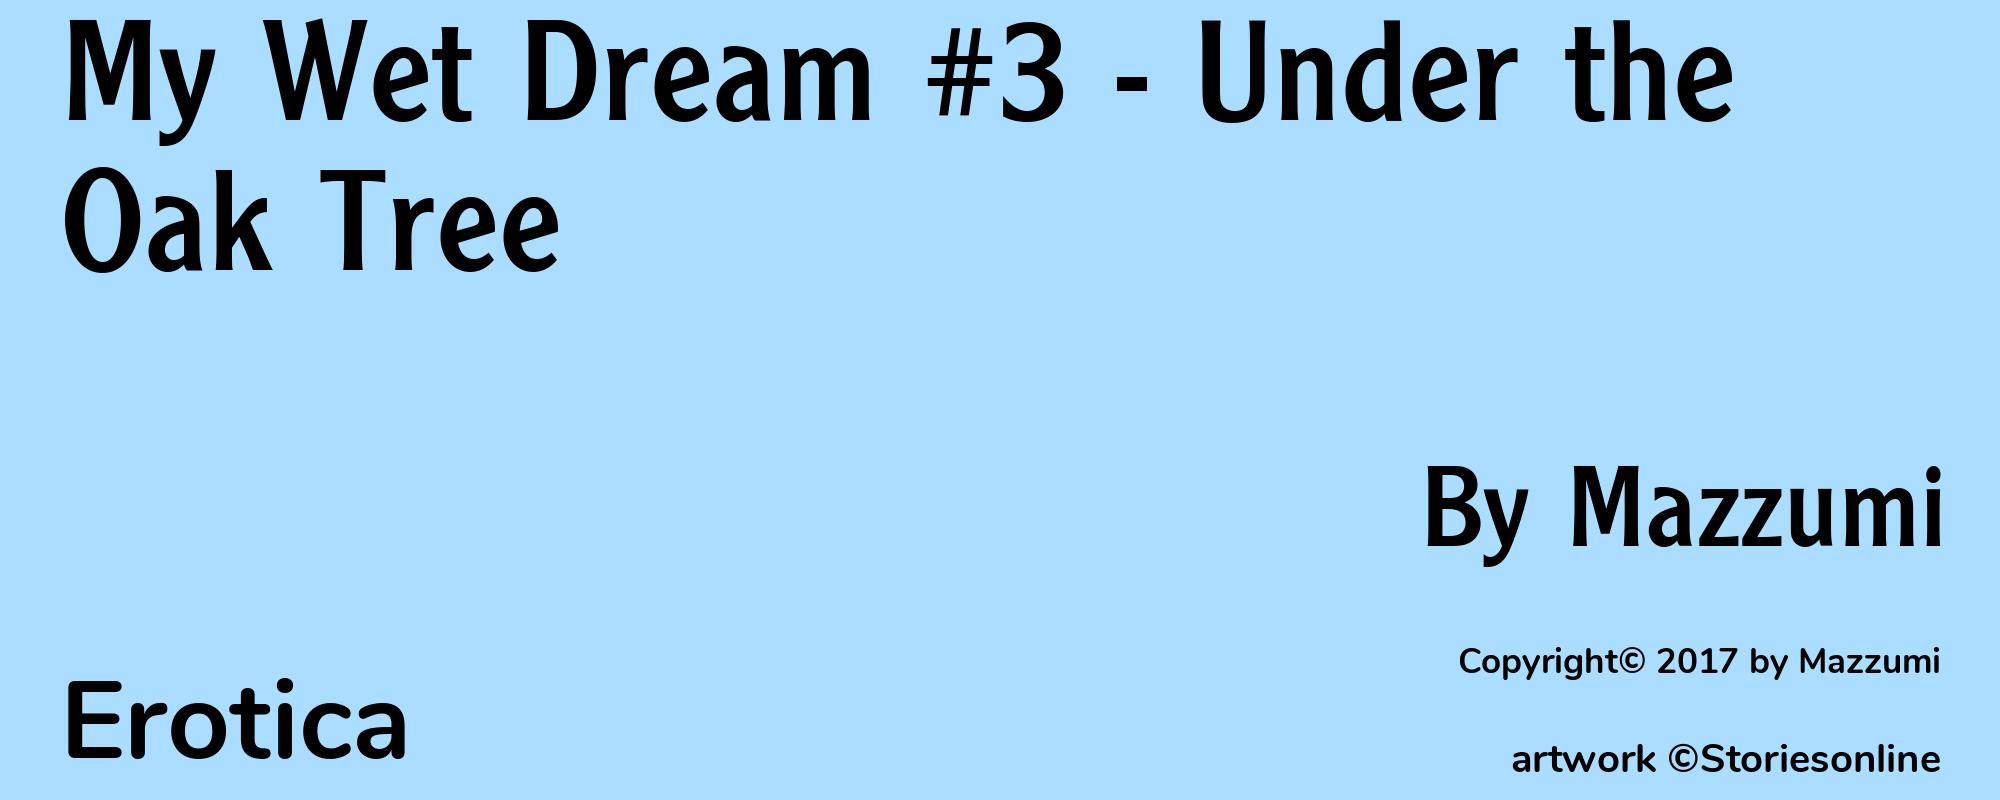 My Wet Dream #3 - Under the Oak Tree - Cover